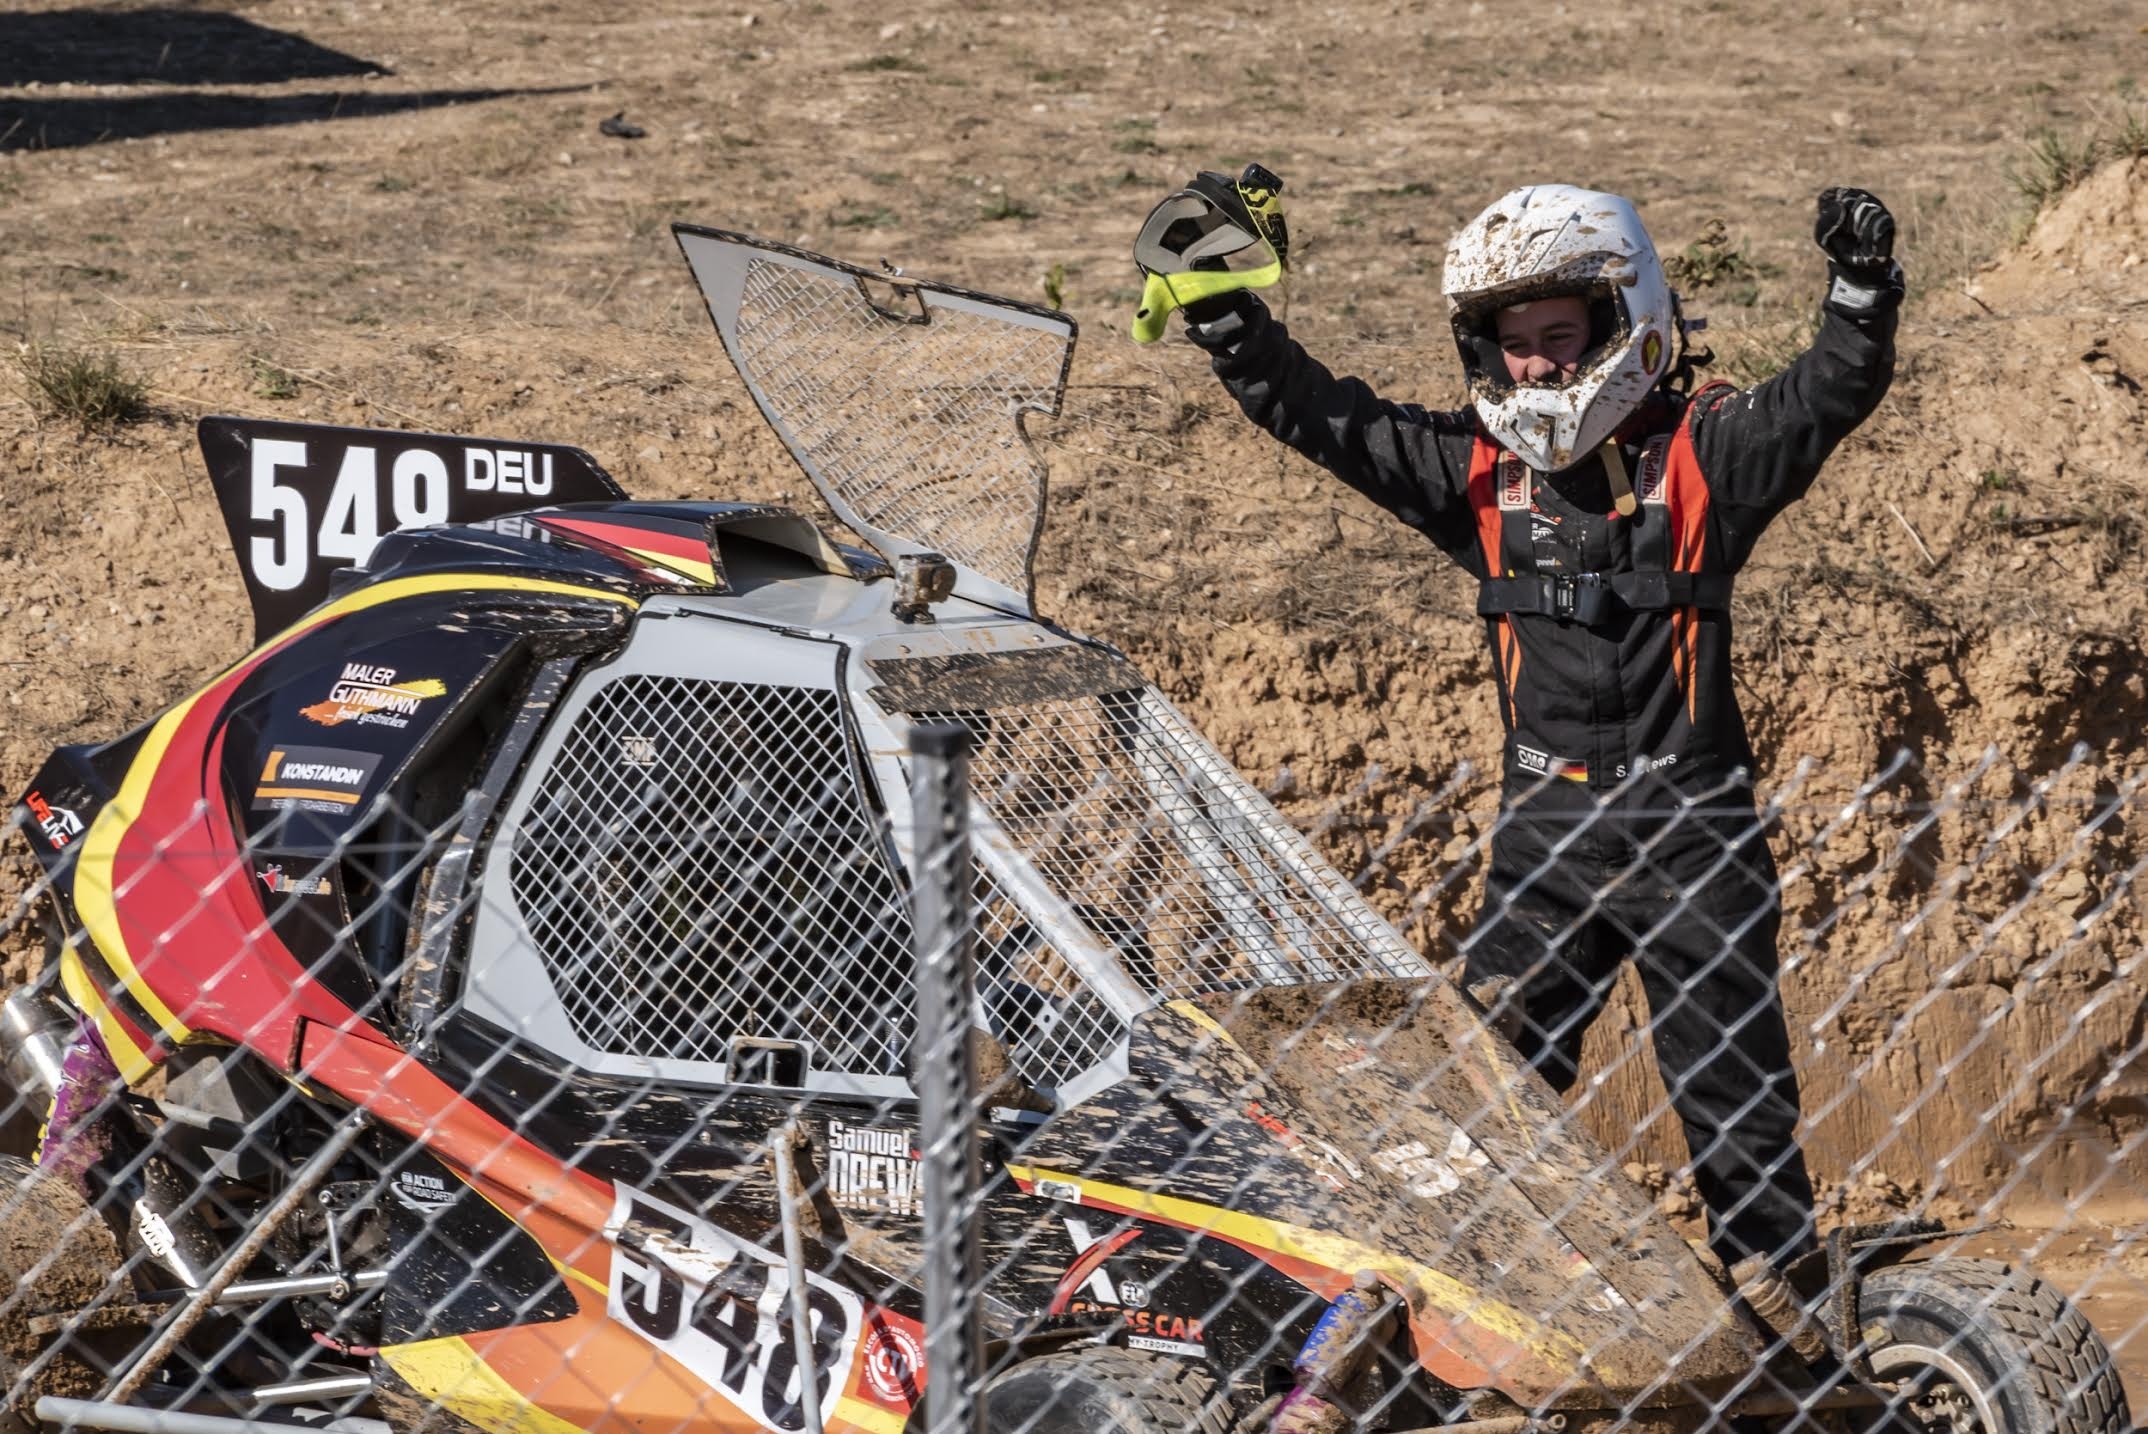 Autocross: Samuel Drews celebrates the victory at FIA Cross Car Academy Trophy Cup, An off-road buggy. 2150x1440 HD Wallpaper.